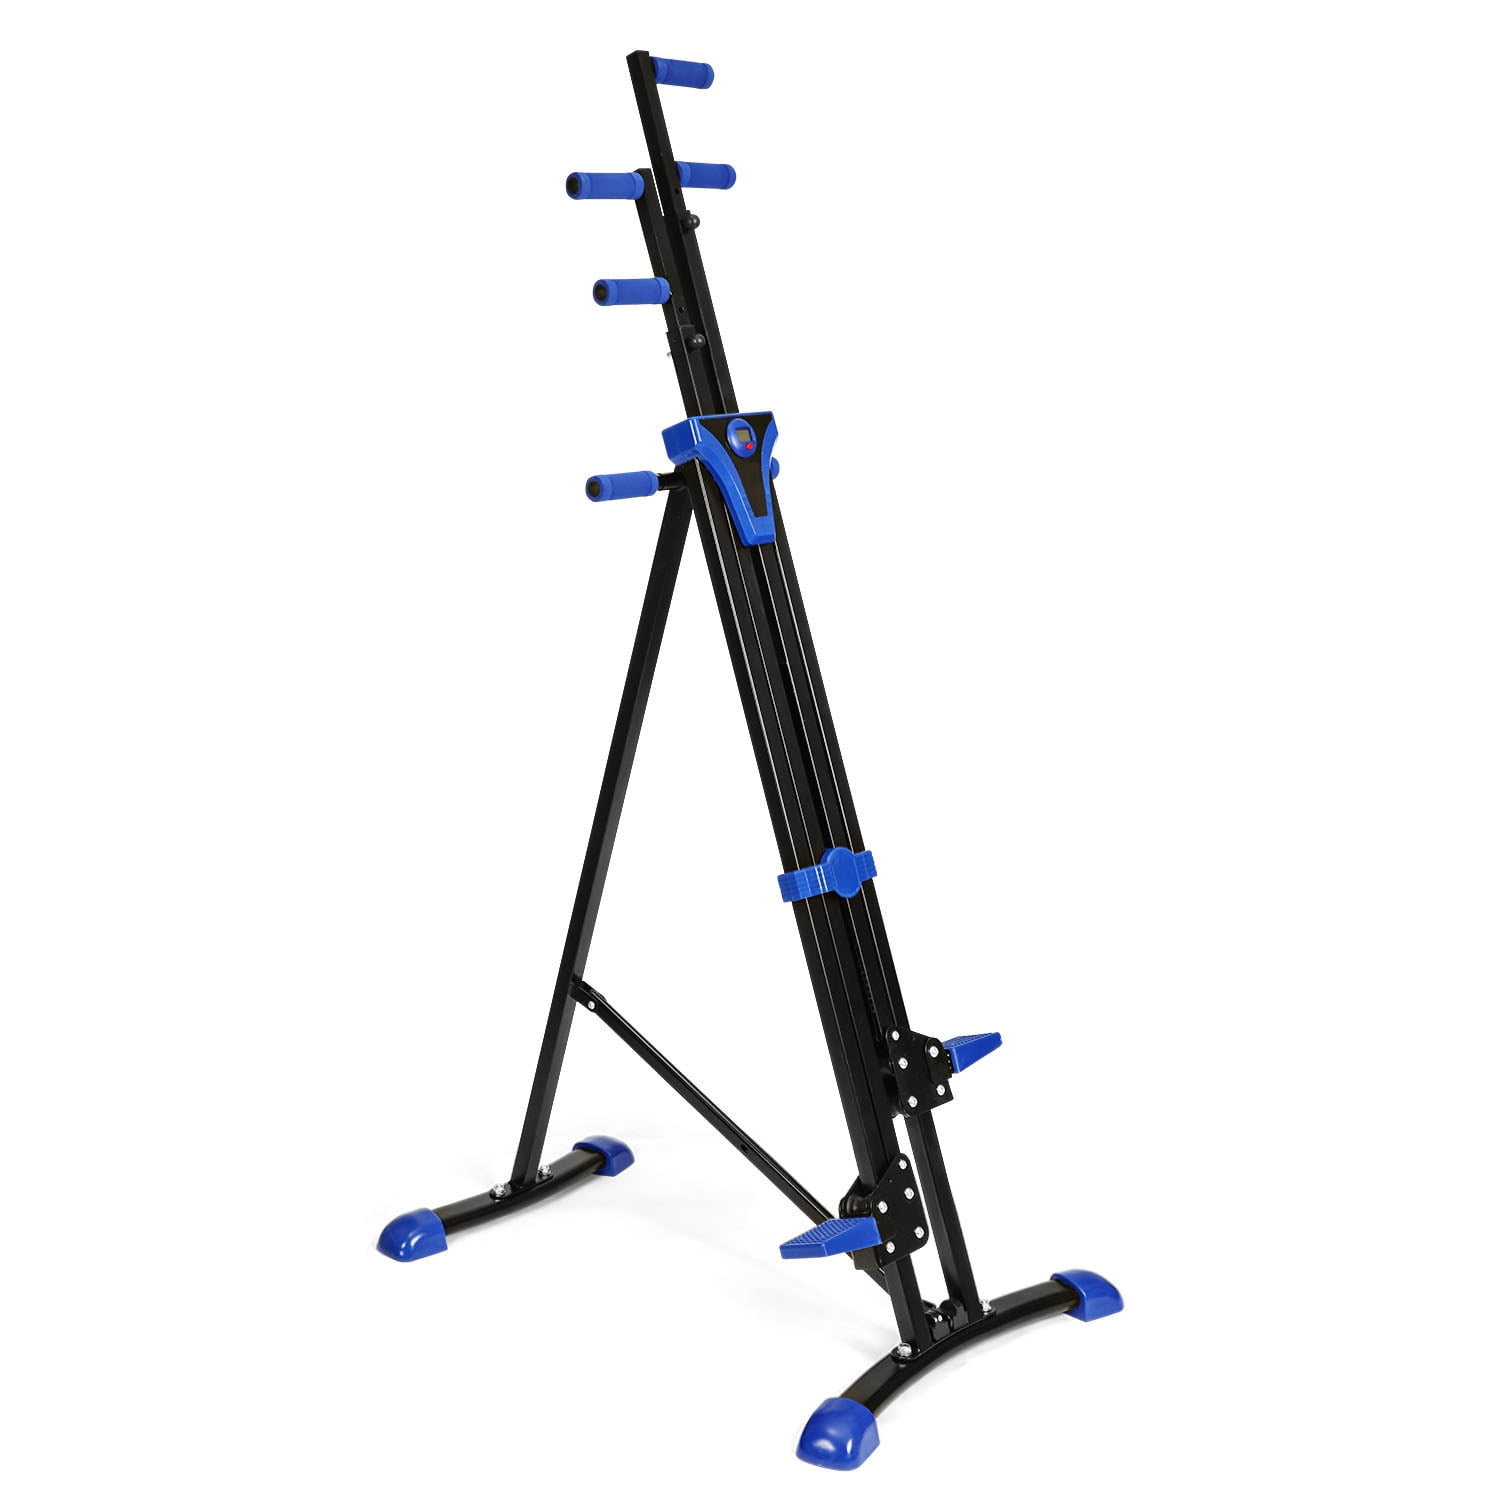 Vertical Climber Machine Exercise Stepper Cardio Workout Fitness Gym Equipment 